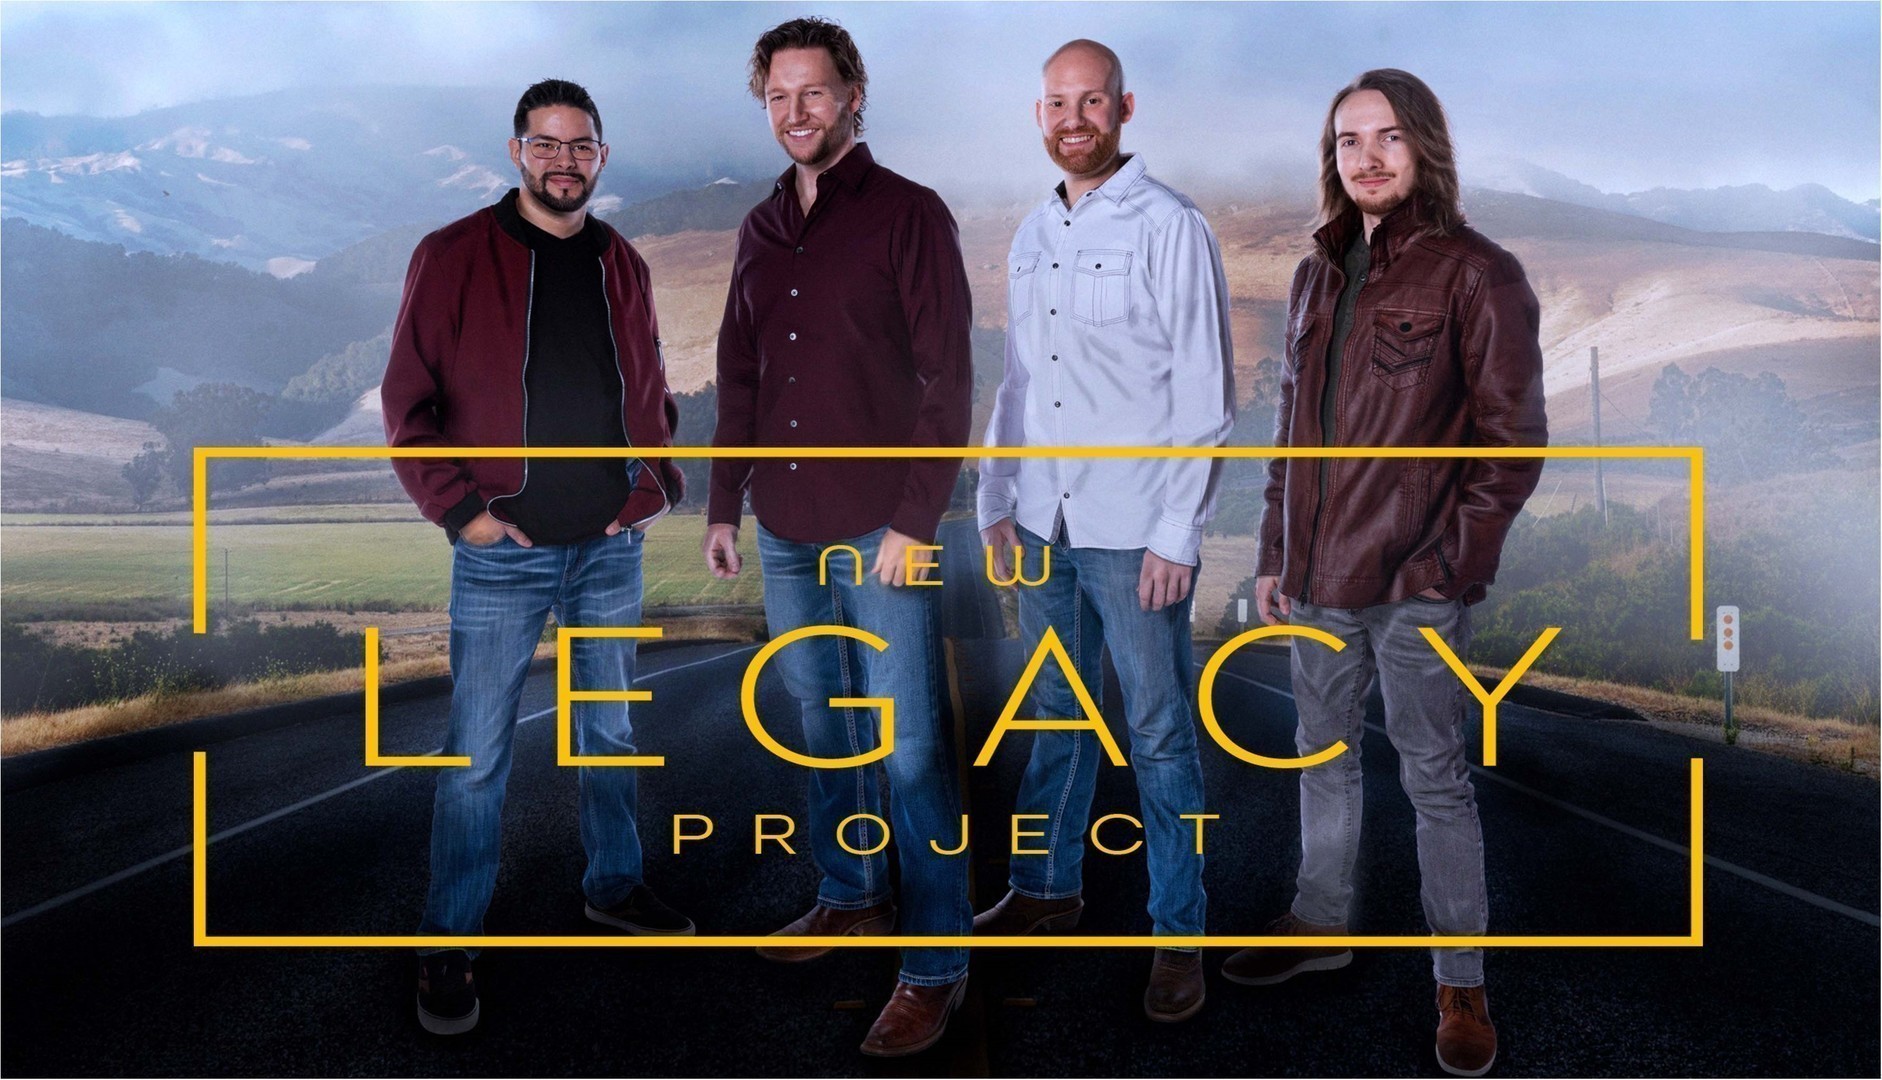 Live NOV 10 Concert in NEW BRAUNFELS with Popular Nashville-based Men's Vocal Band, NEW LEGACY, New Braunfels, Texas, United States